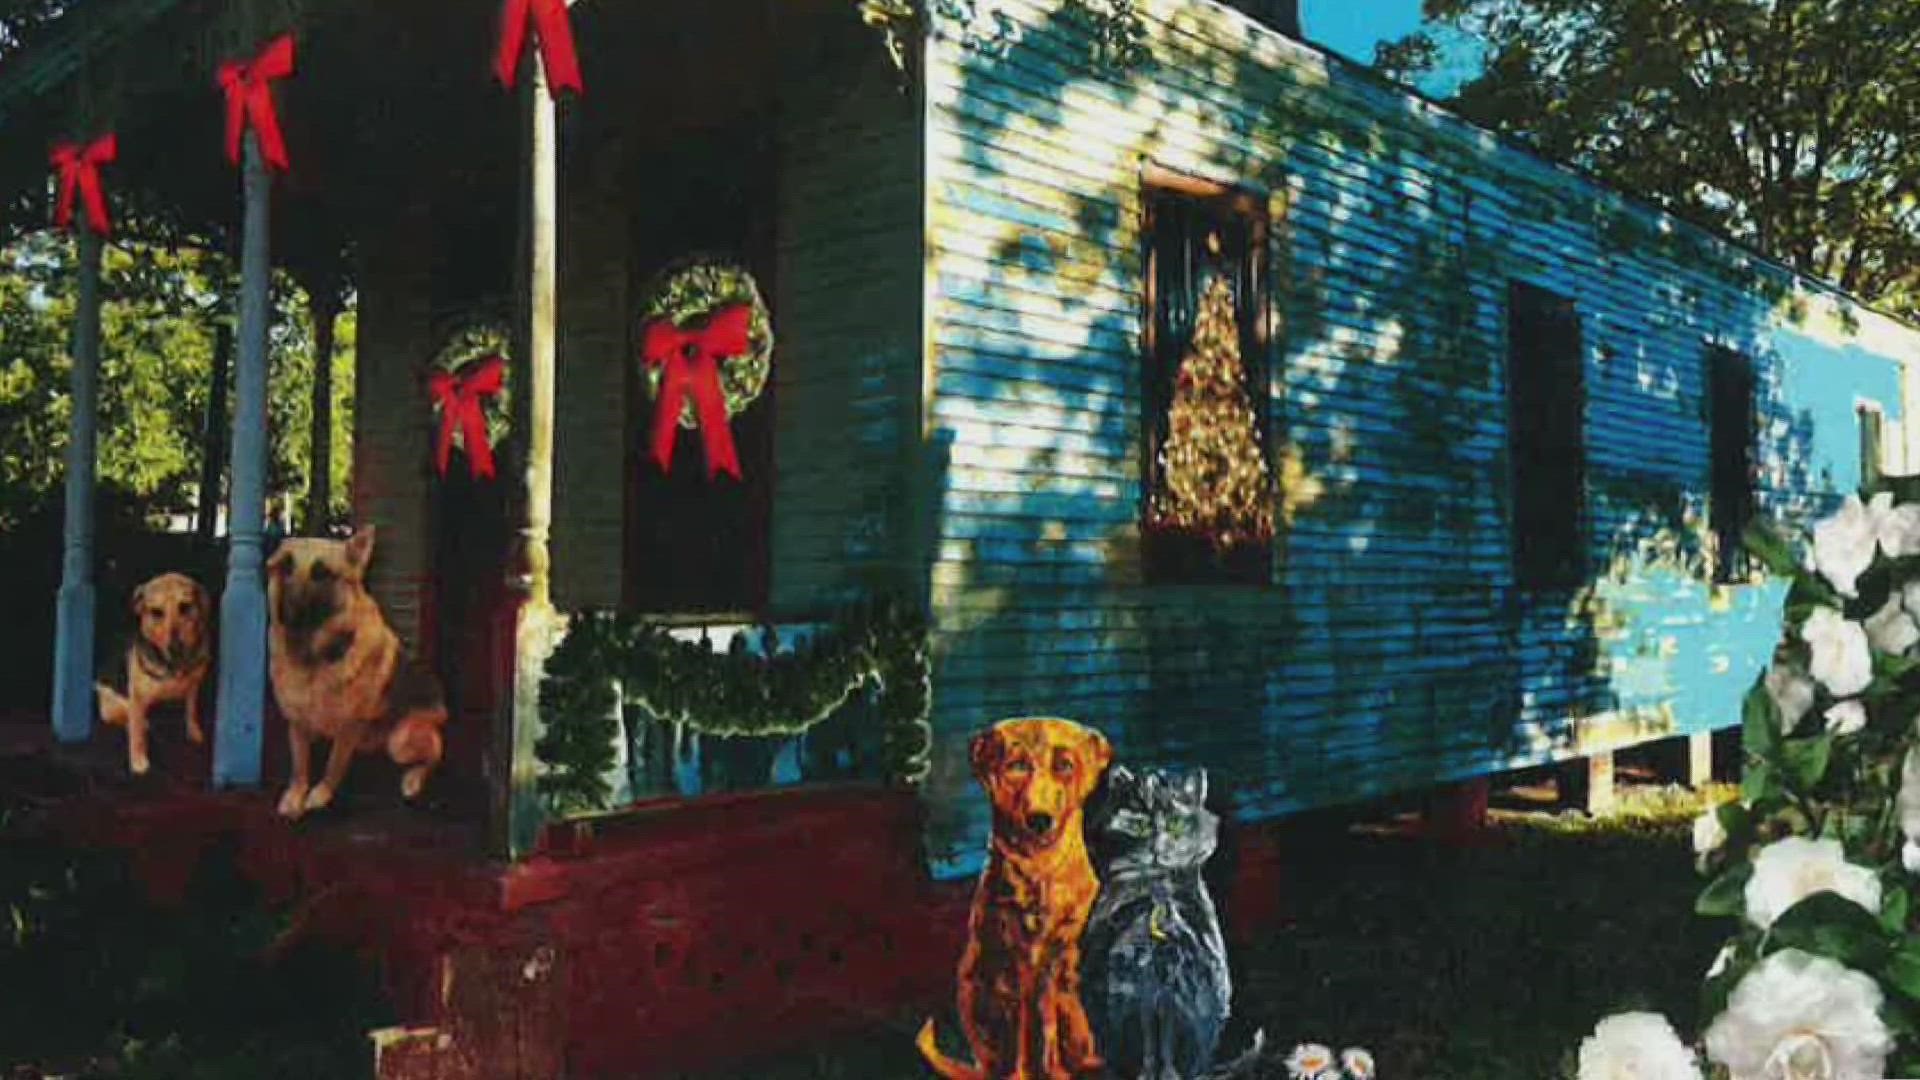 New Orleans native's new book highlights homeless people and animals over holiday season